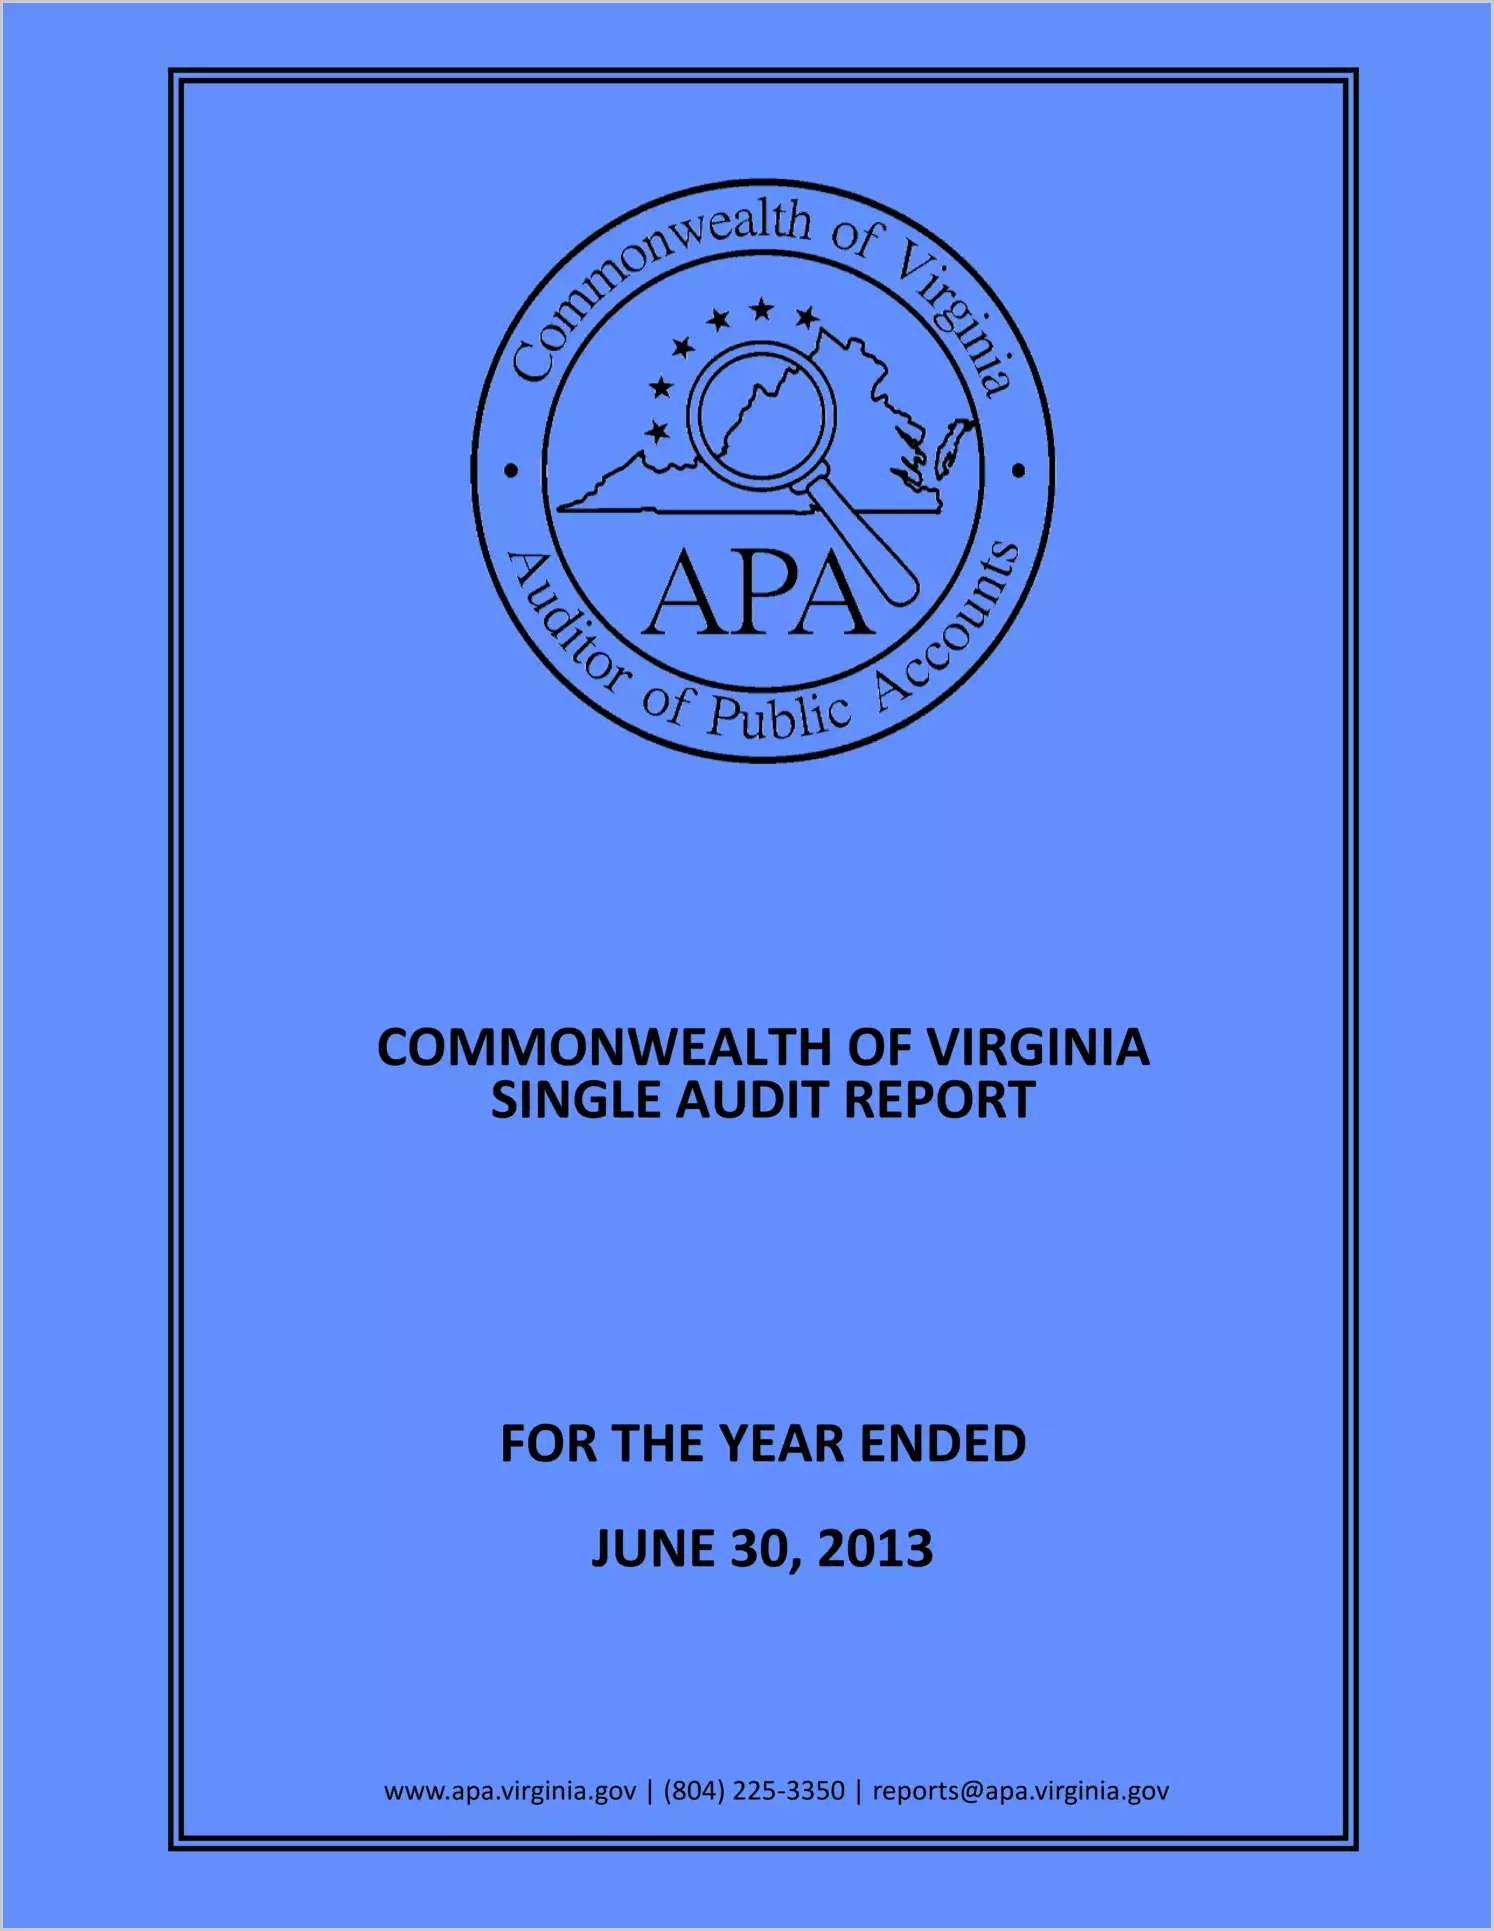 Commonwealth of Virginia Single Audit Report for the Year Ended June 30, 2013